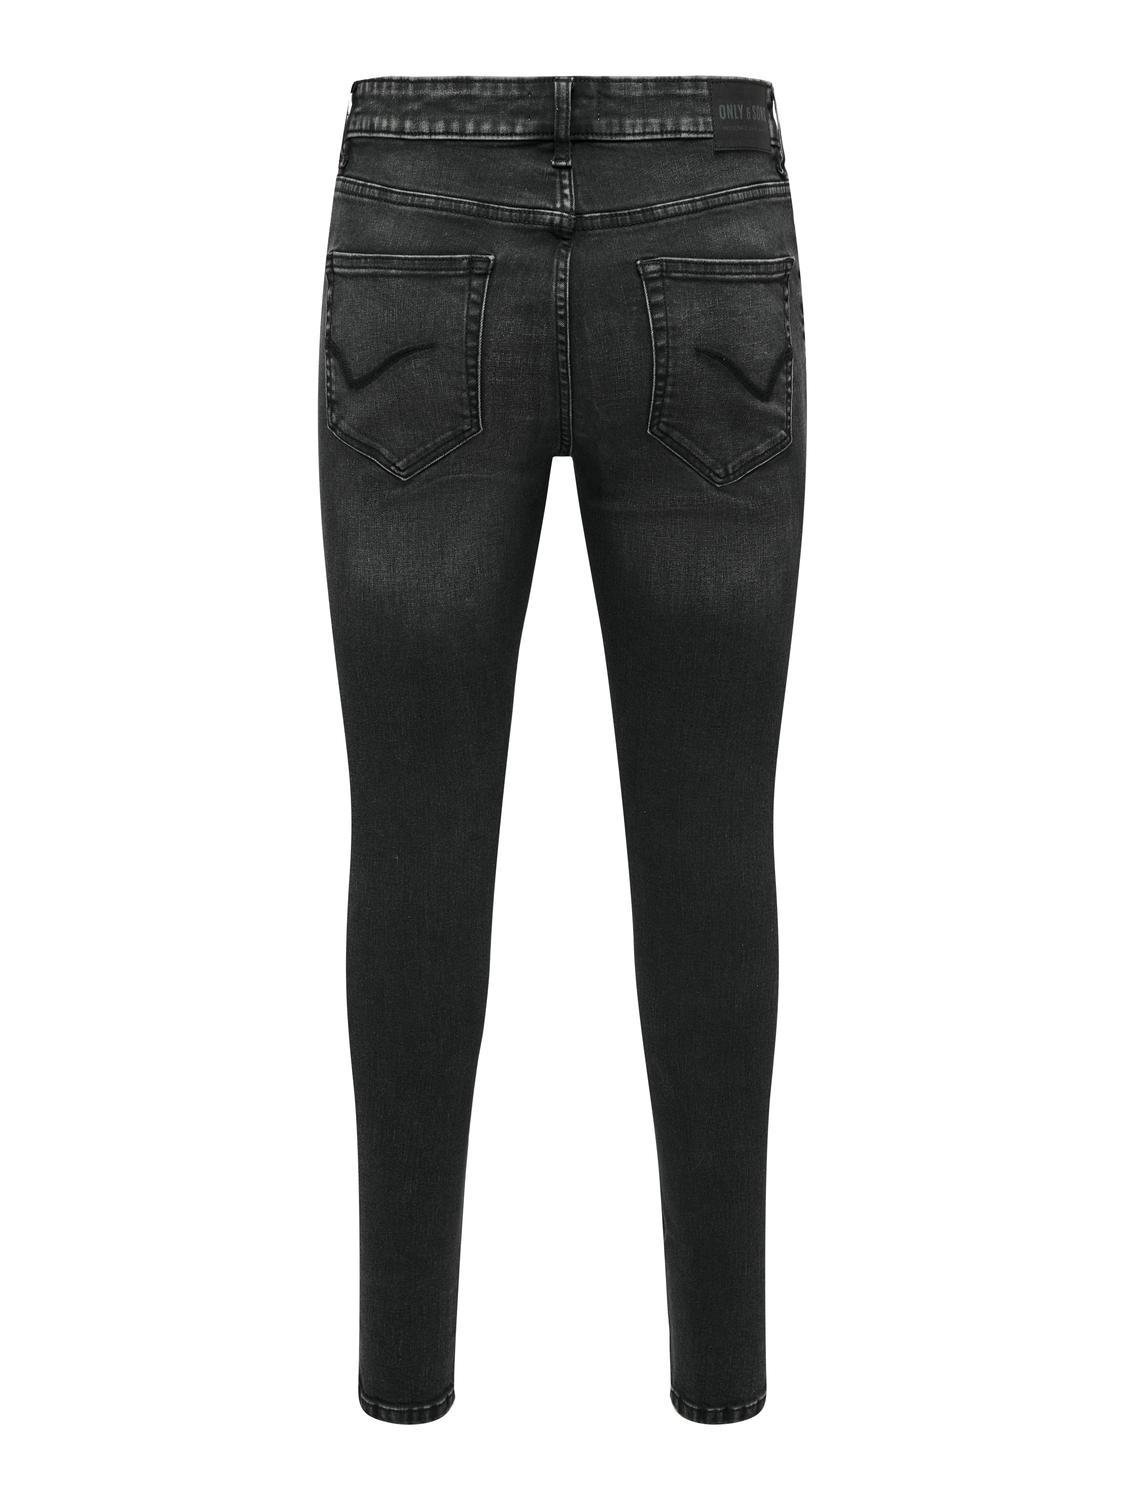 ONLY & SONS Jeans Spray on Fit Taille moyenne -Black Denim - 22027848